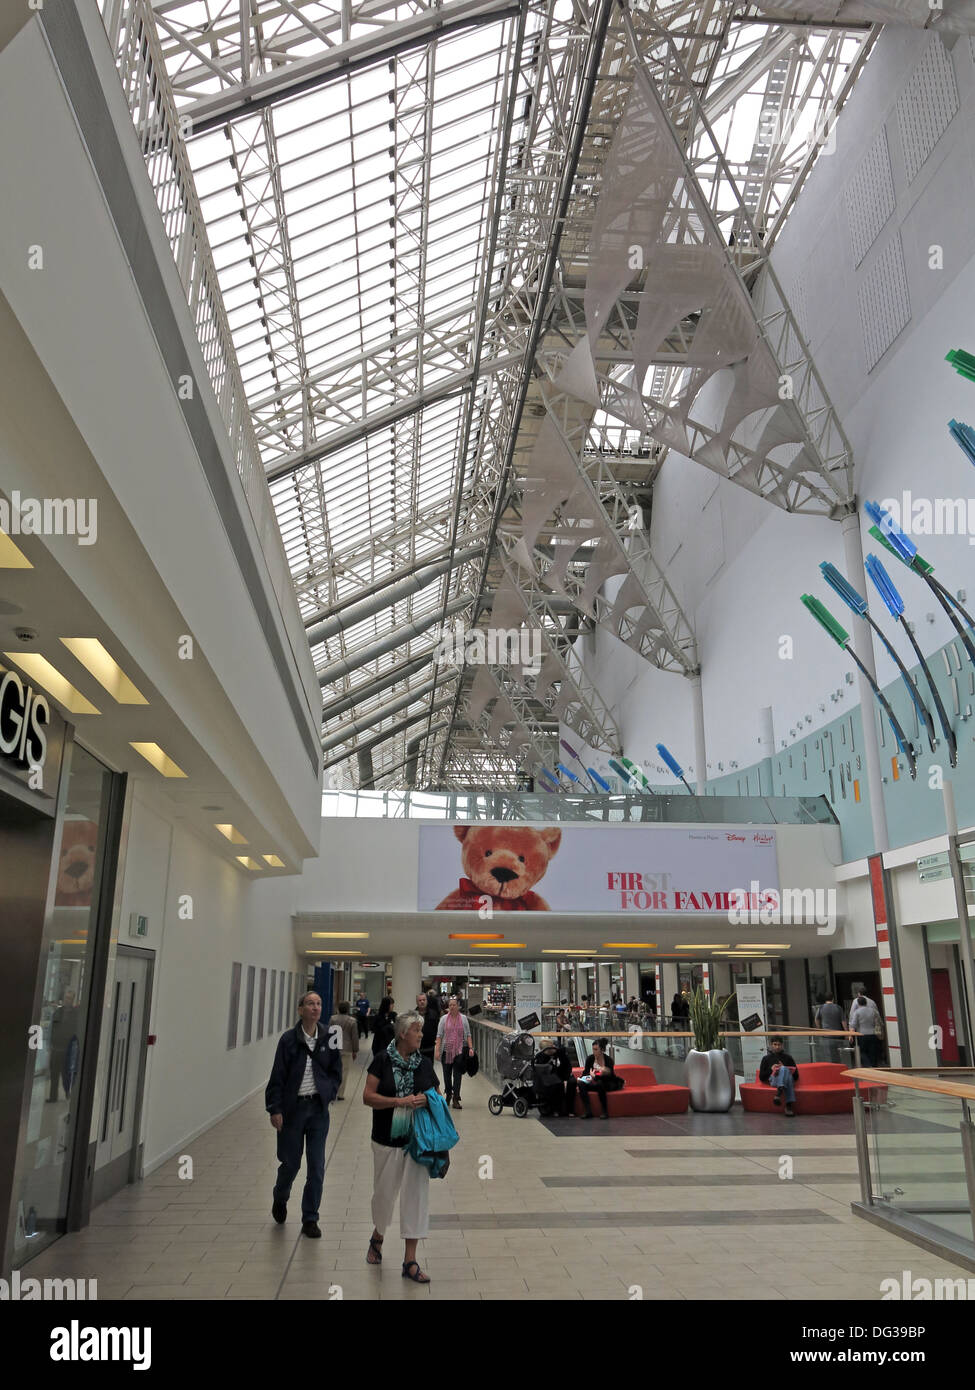 Interior of St Enoch Shopping retail shopping centre Glasgow Stock Photo